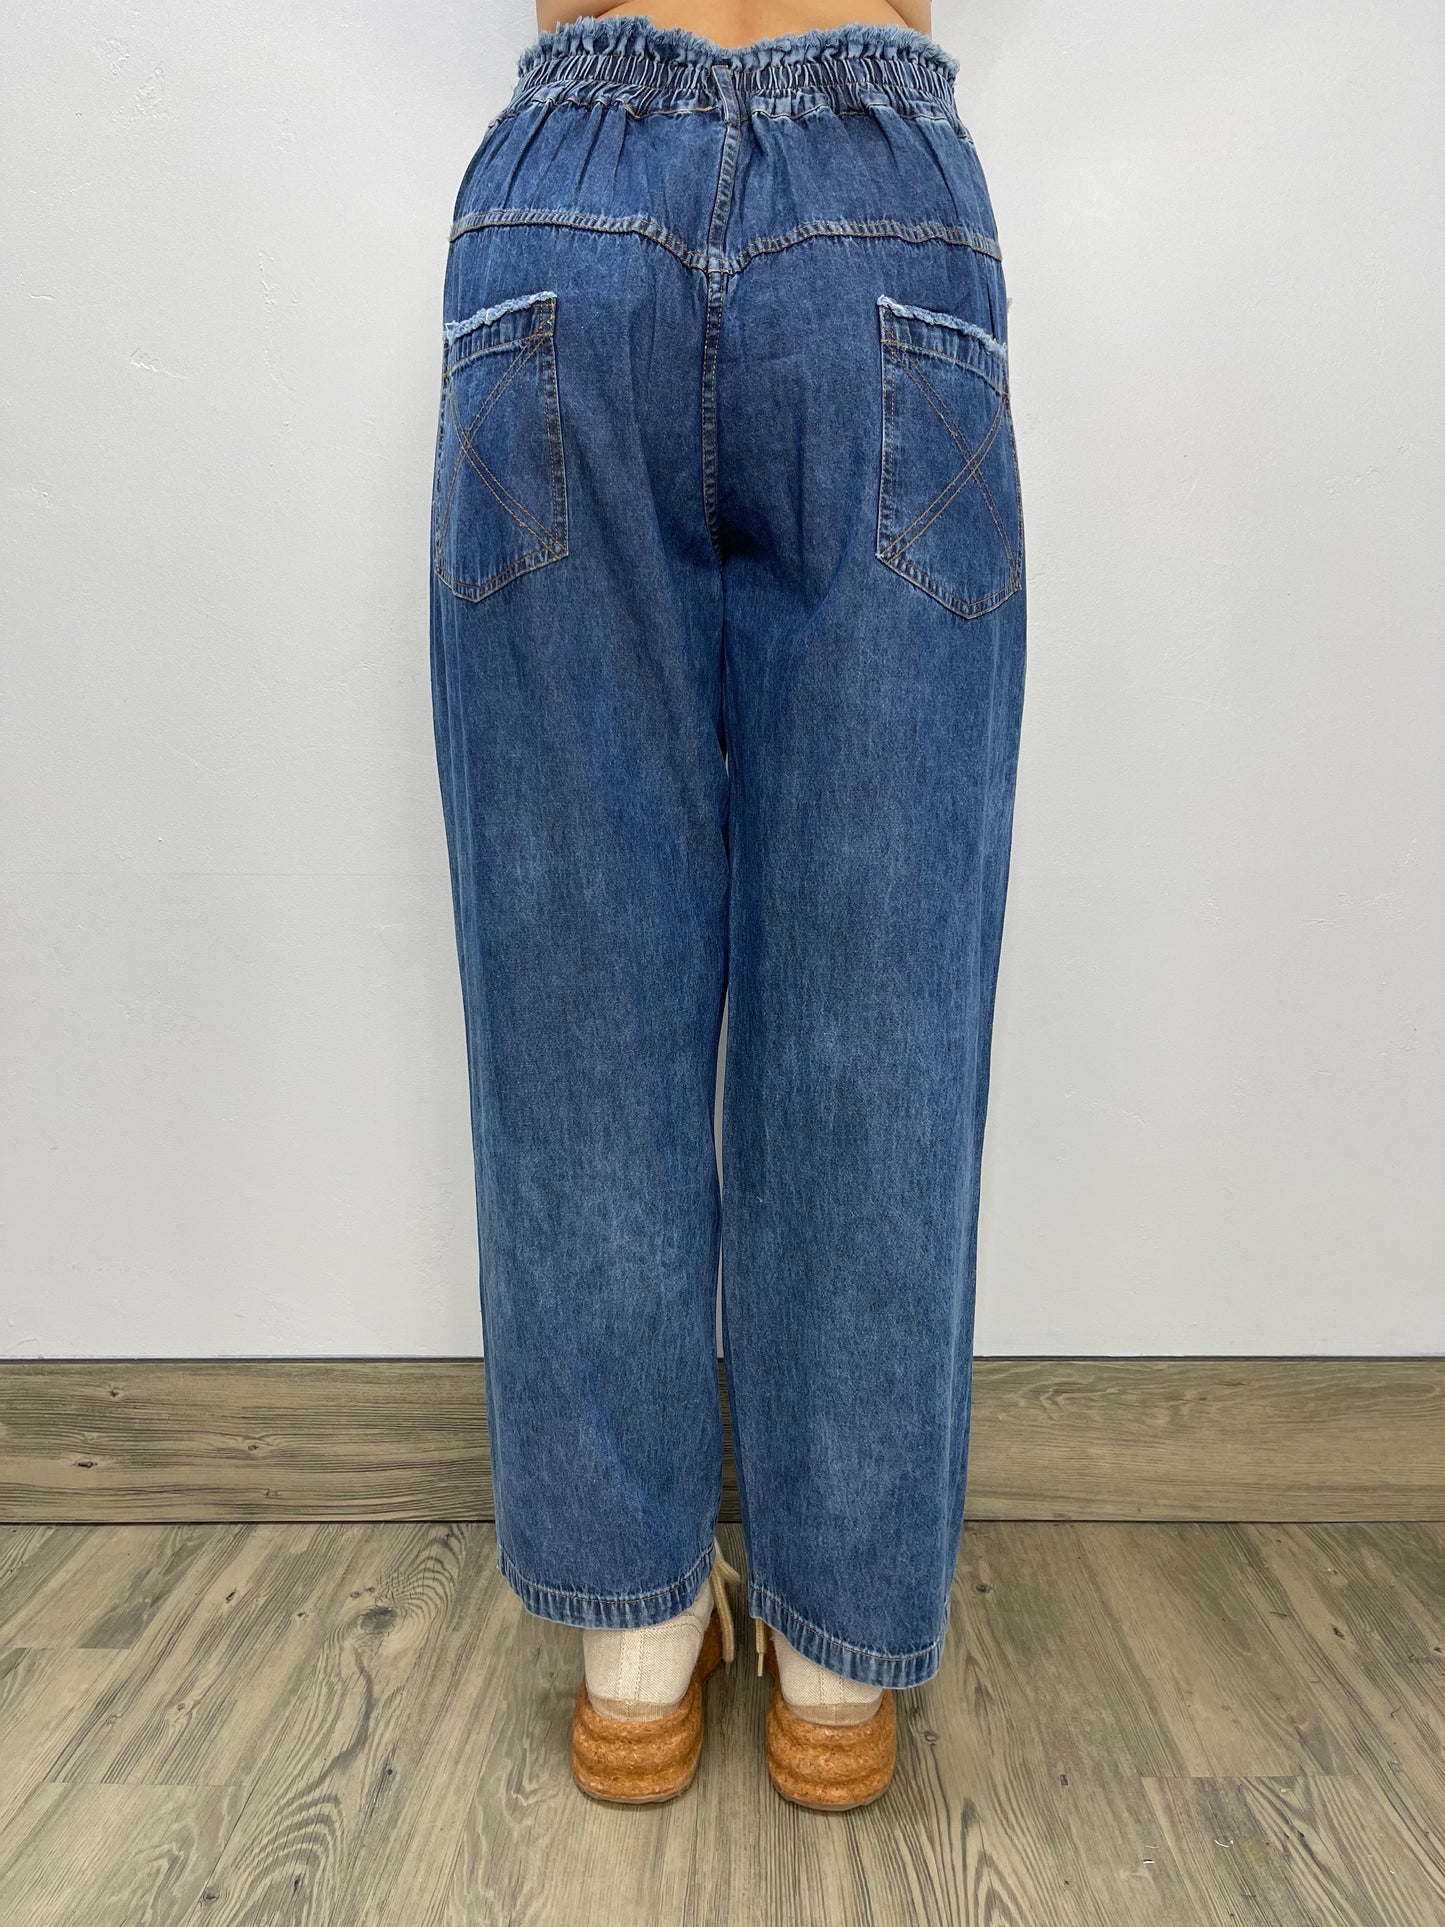 Load image into Gallery viewer, Blue Distress Star Denim Jeans with Yellow Accents
